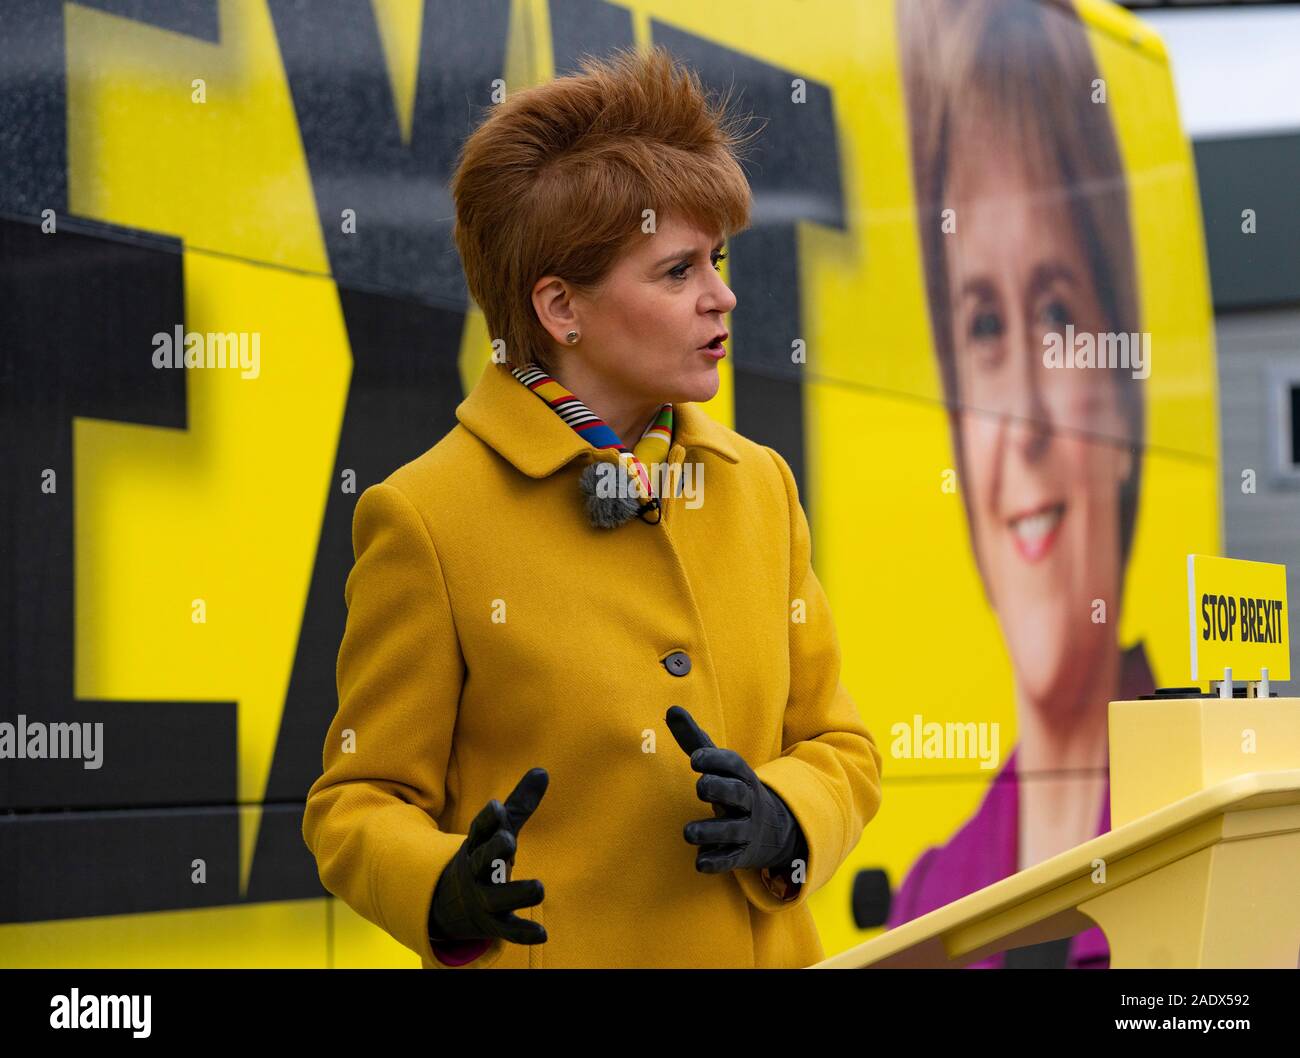 South Queensferry, Scotland, UK. 5th Dec, 2019. SNP leader Nicola Sturgeon marked the final week of the SNP's election campaign by kicking off a tour of Scotland on the SNP campaign bus. The First Minister warned that there are just seven days left to stop Brexit, and to put Scotland's future in Scotland's hands - not Boris Johnson's. Credit: Iain Masterton/Alamy Live News Stock Photo